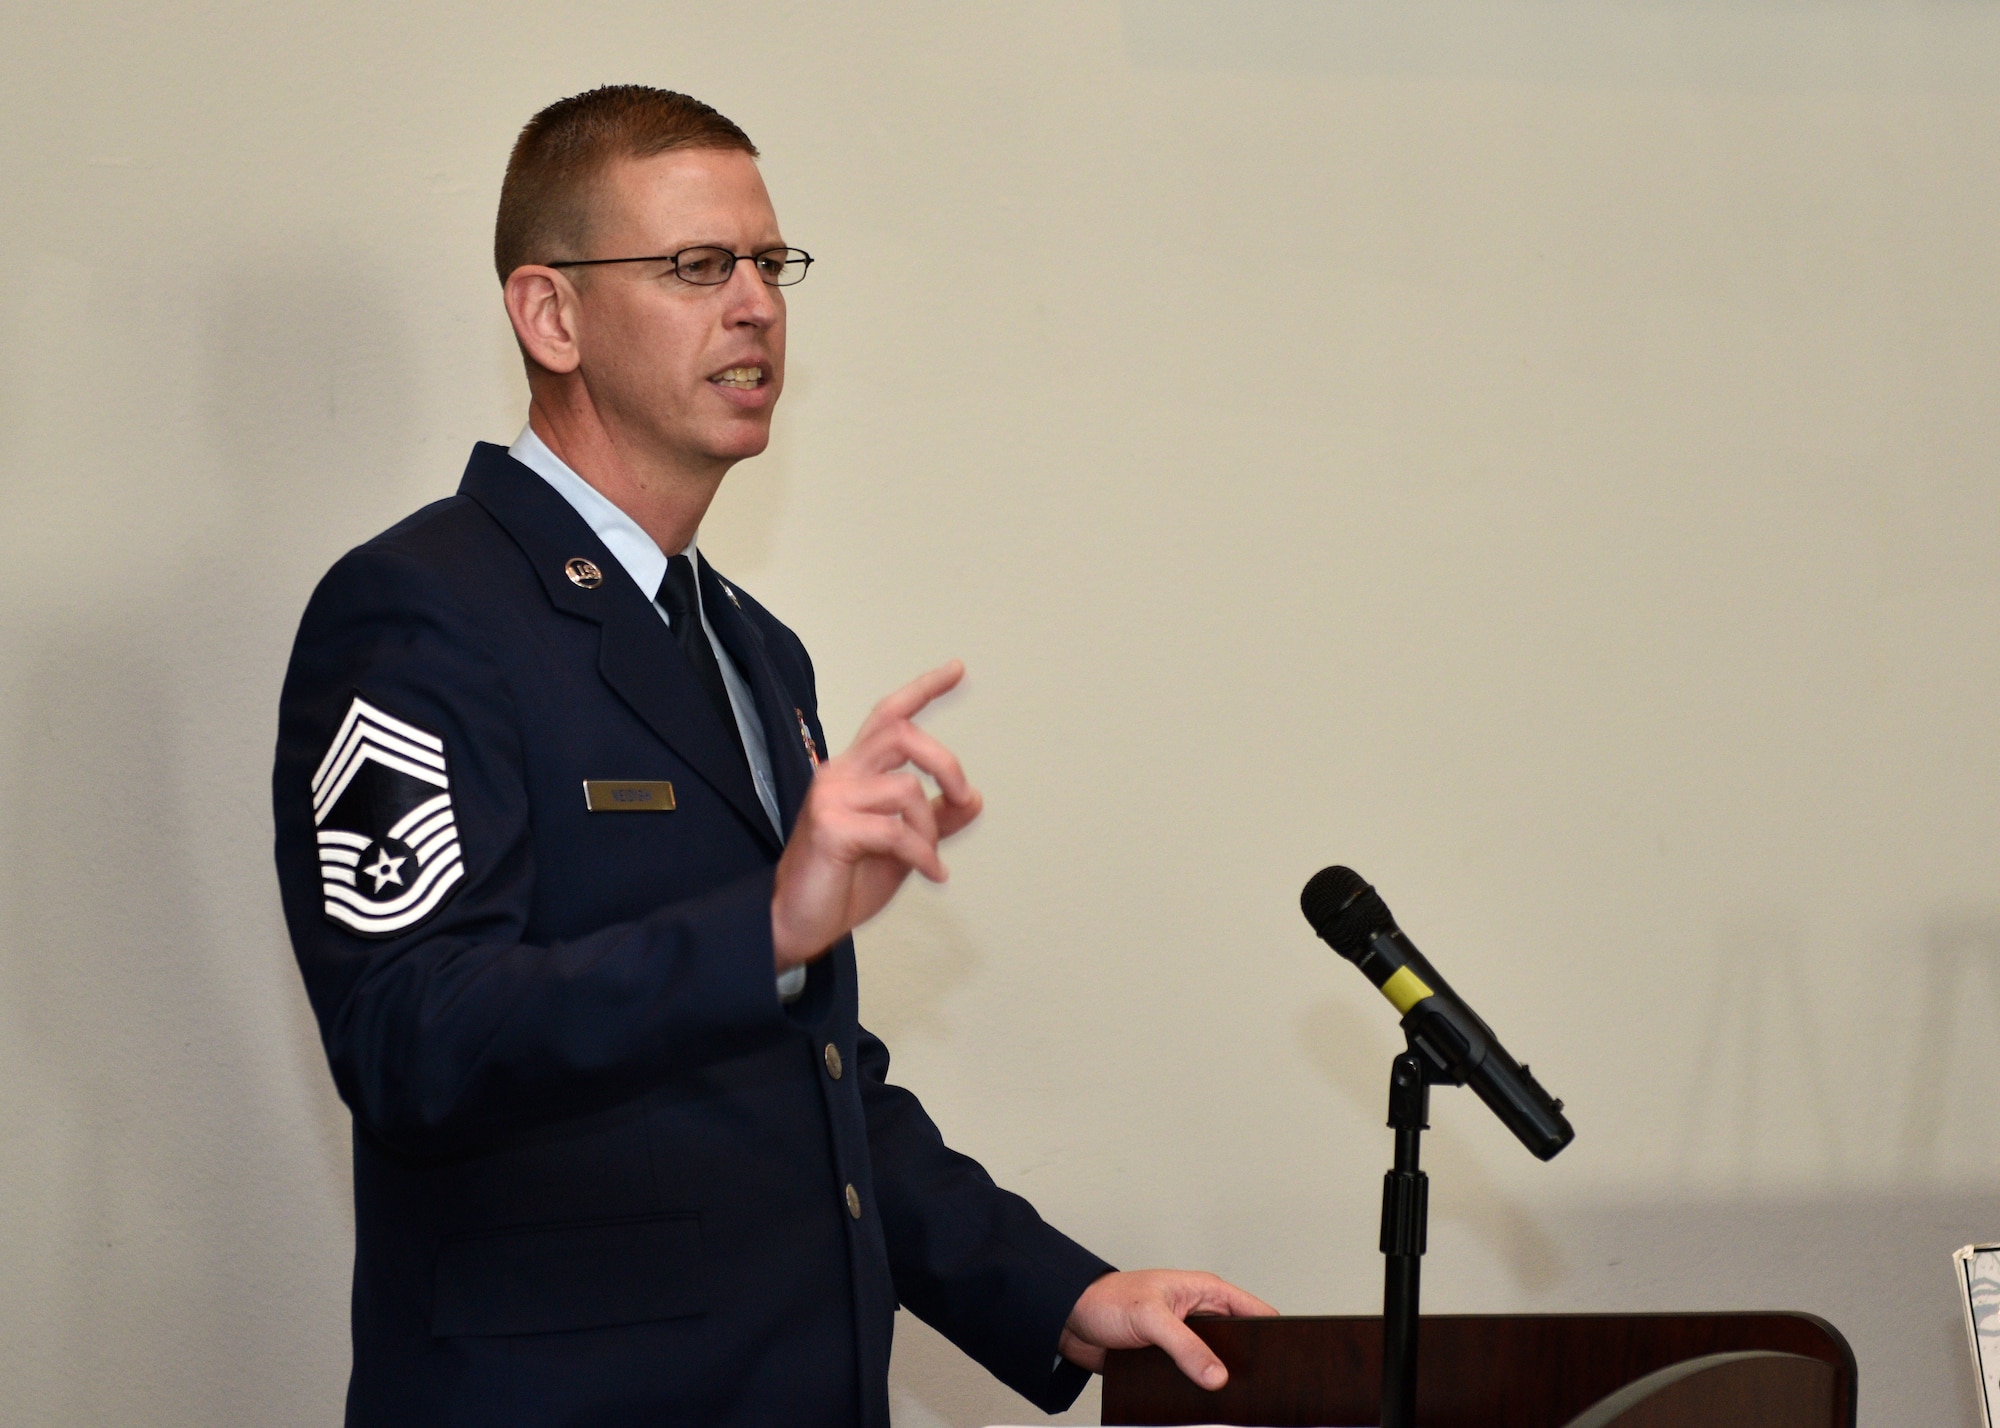 Chief Master Sgt. Jon Neidigh, 47th Operations Support Squadron radar approach control chief controller at Laughlin Air Force Base, speaks to the graduates of Airman Leadership School Class 20-A during the their ceremony at the event center on Goodfellow Air Force Base, Texas, December 12, 2019. Neidigh spoke about how important it is for the graduates to not be afraid to make mistakes and learn from them. (U.S. Air Force photo by Airman 1st Class Robyn Hunsinger)